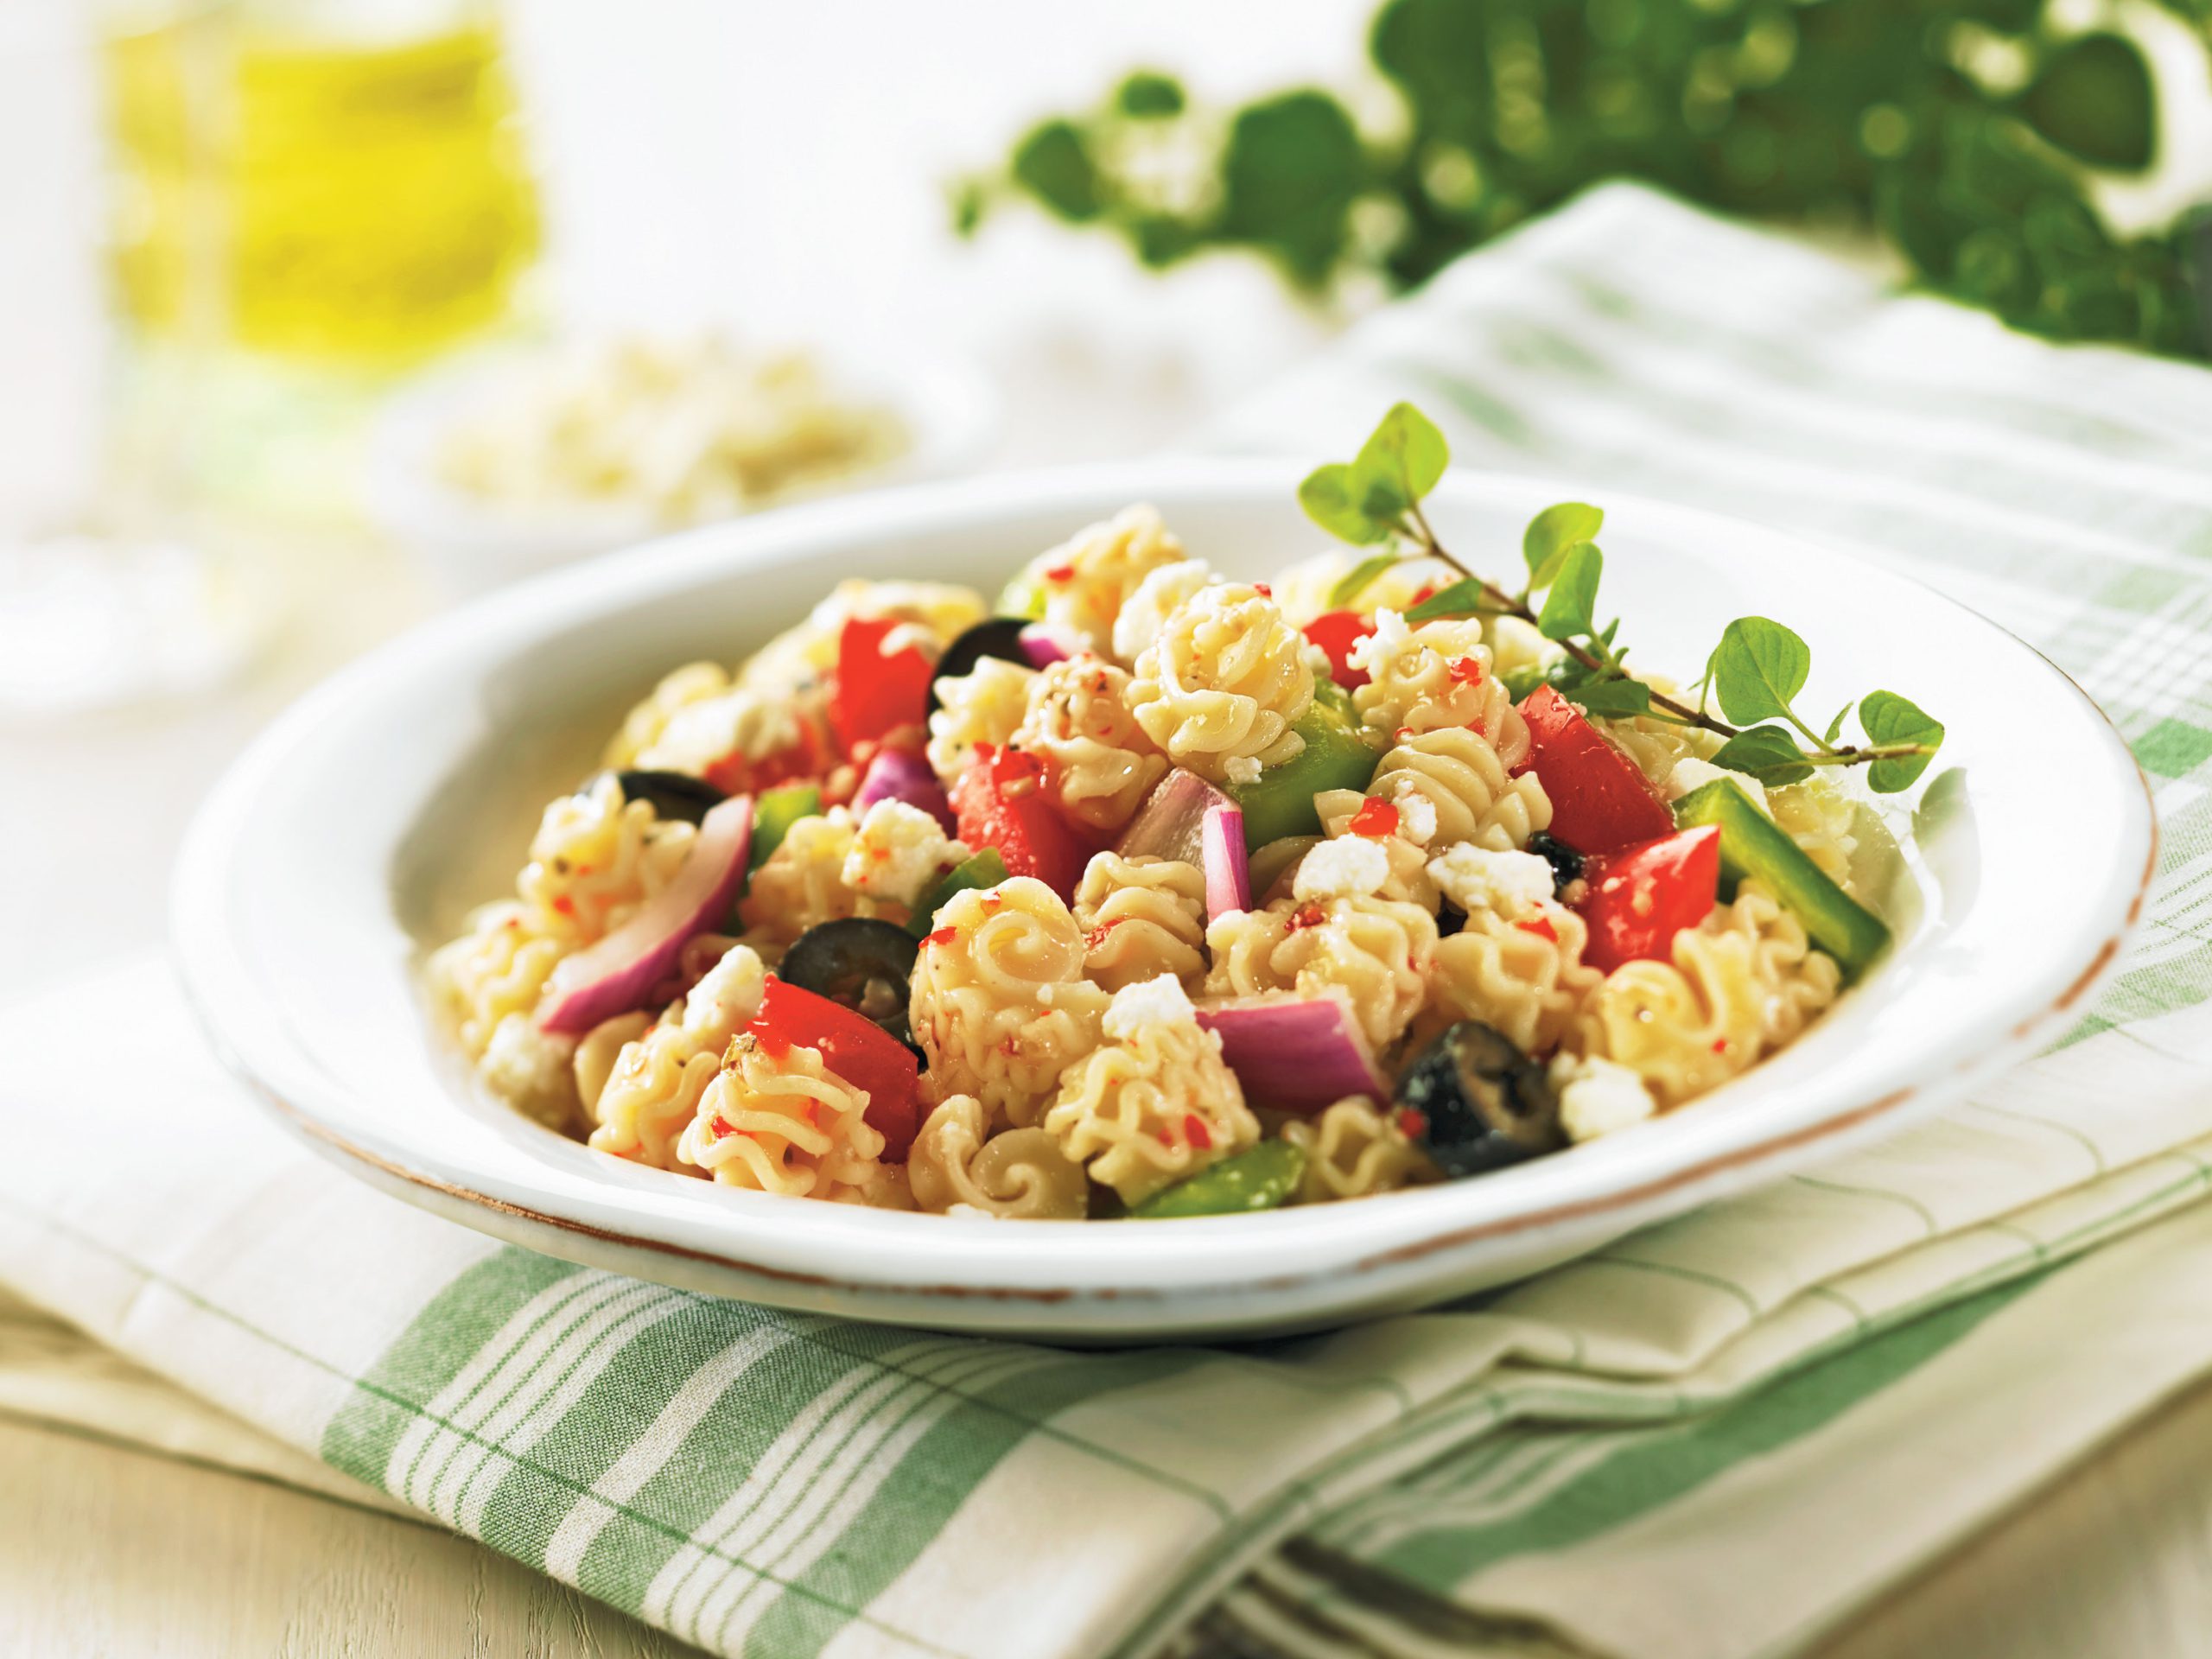 Flavors of the Mediterranean come to life with pasta in this great summertime salad recipe.